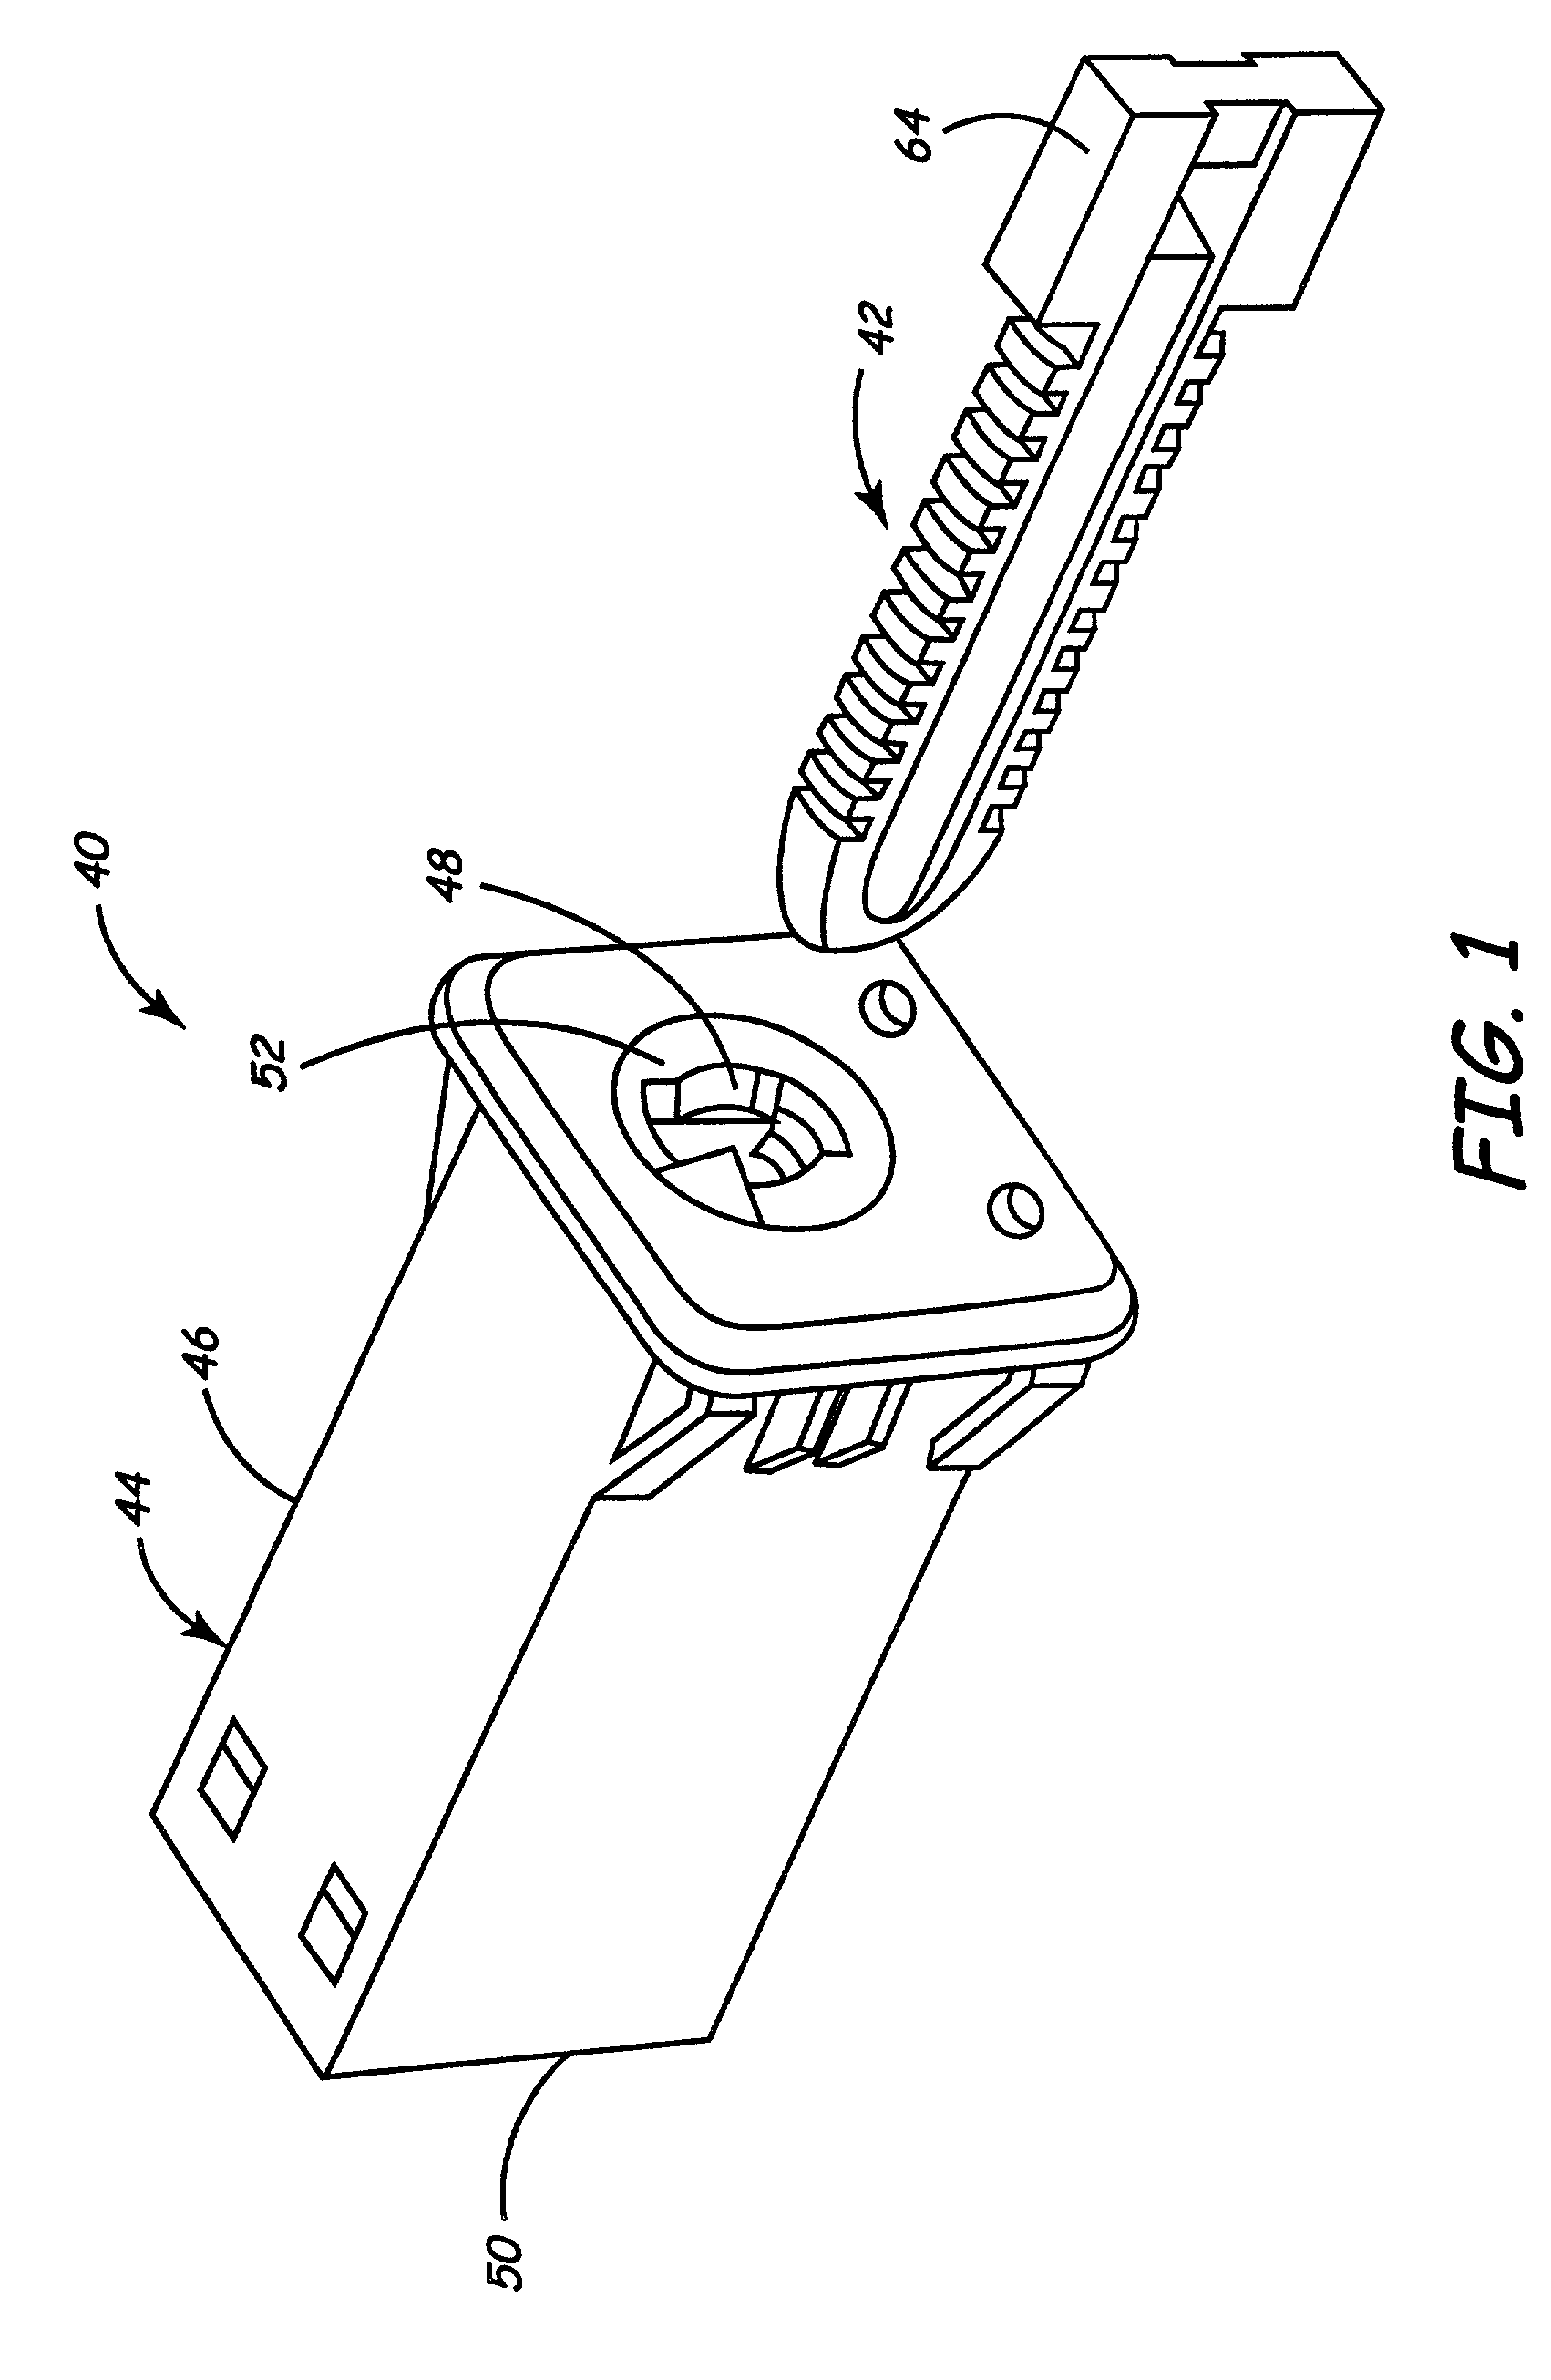 Electronic key system and method